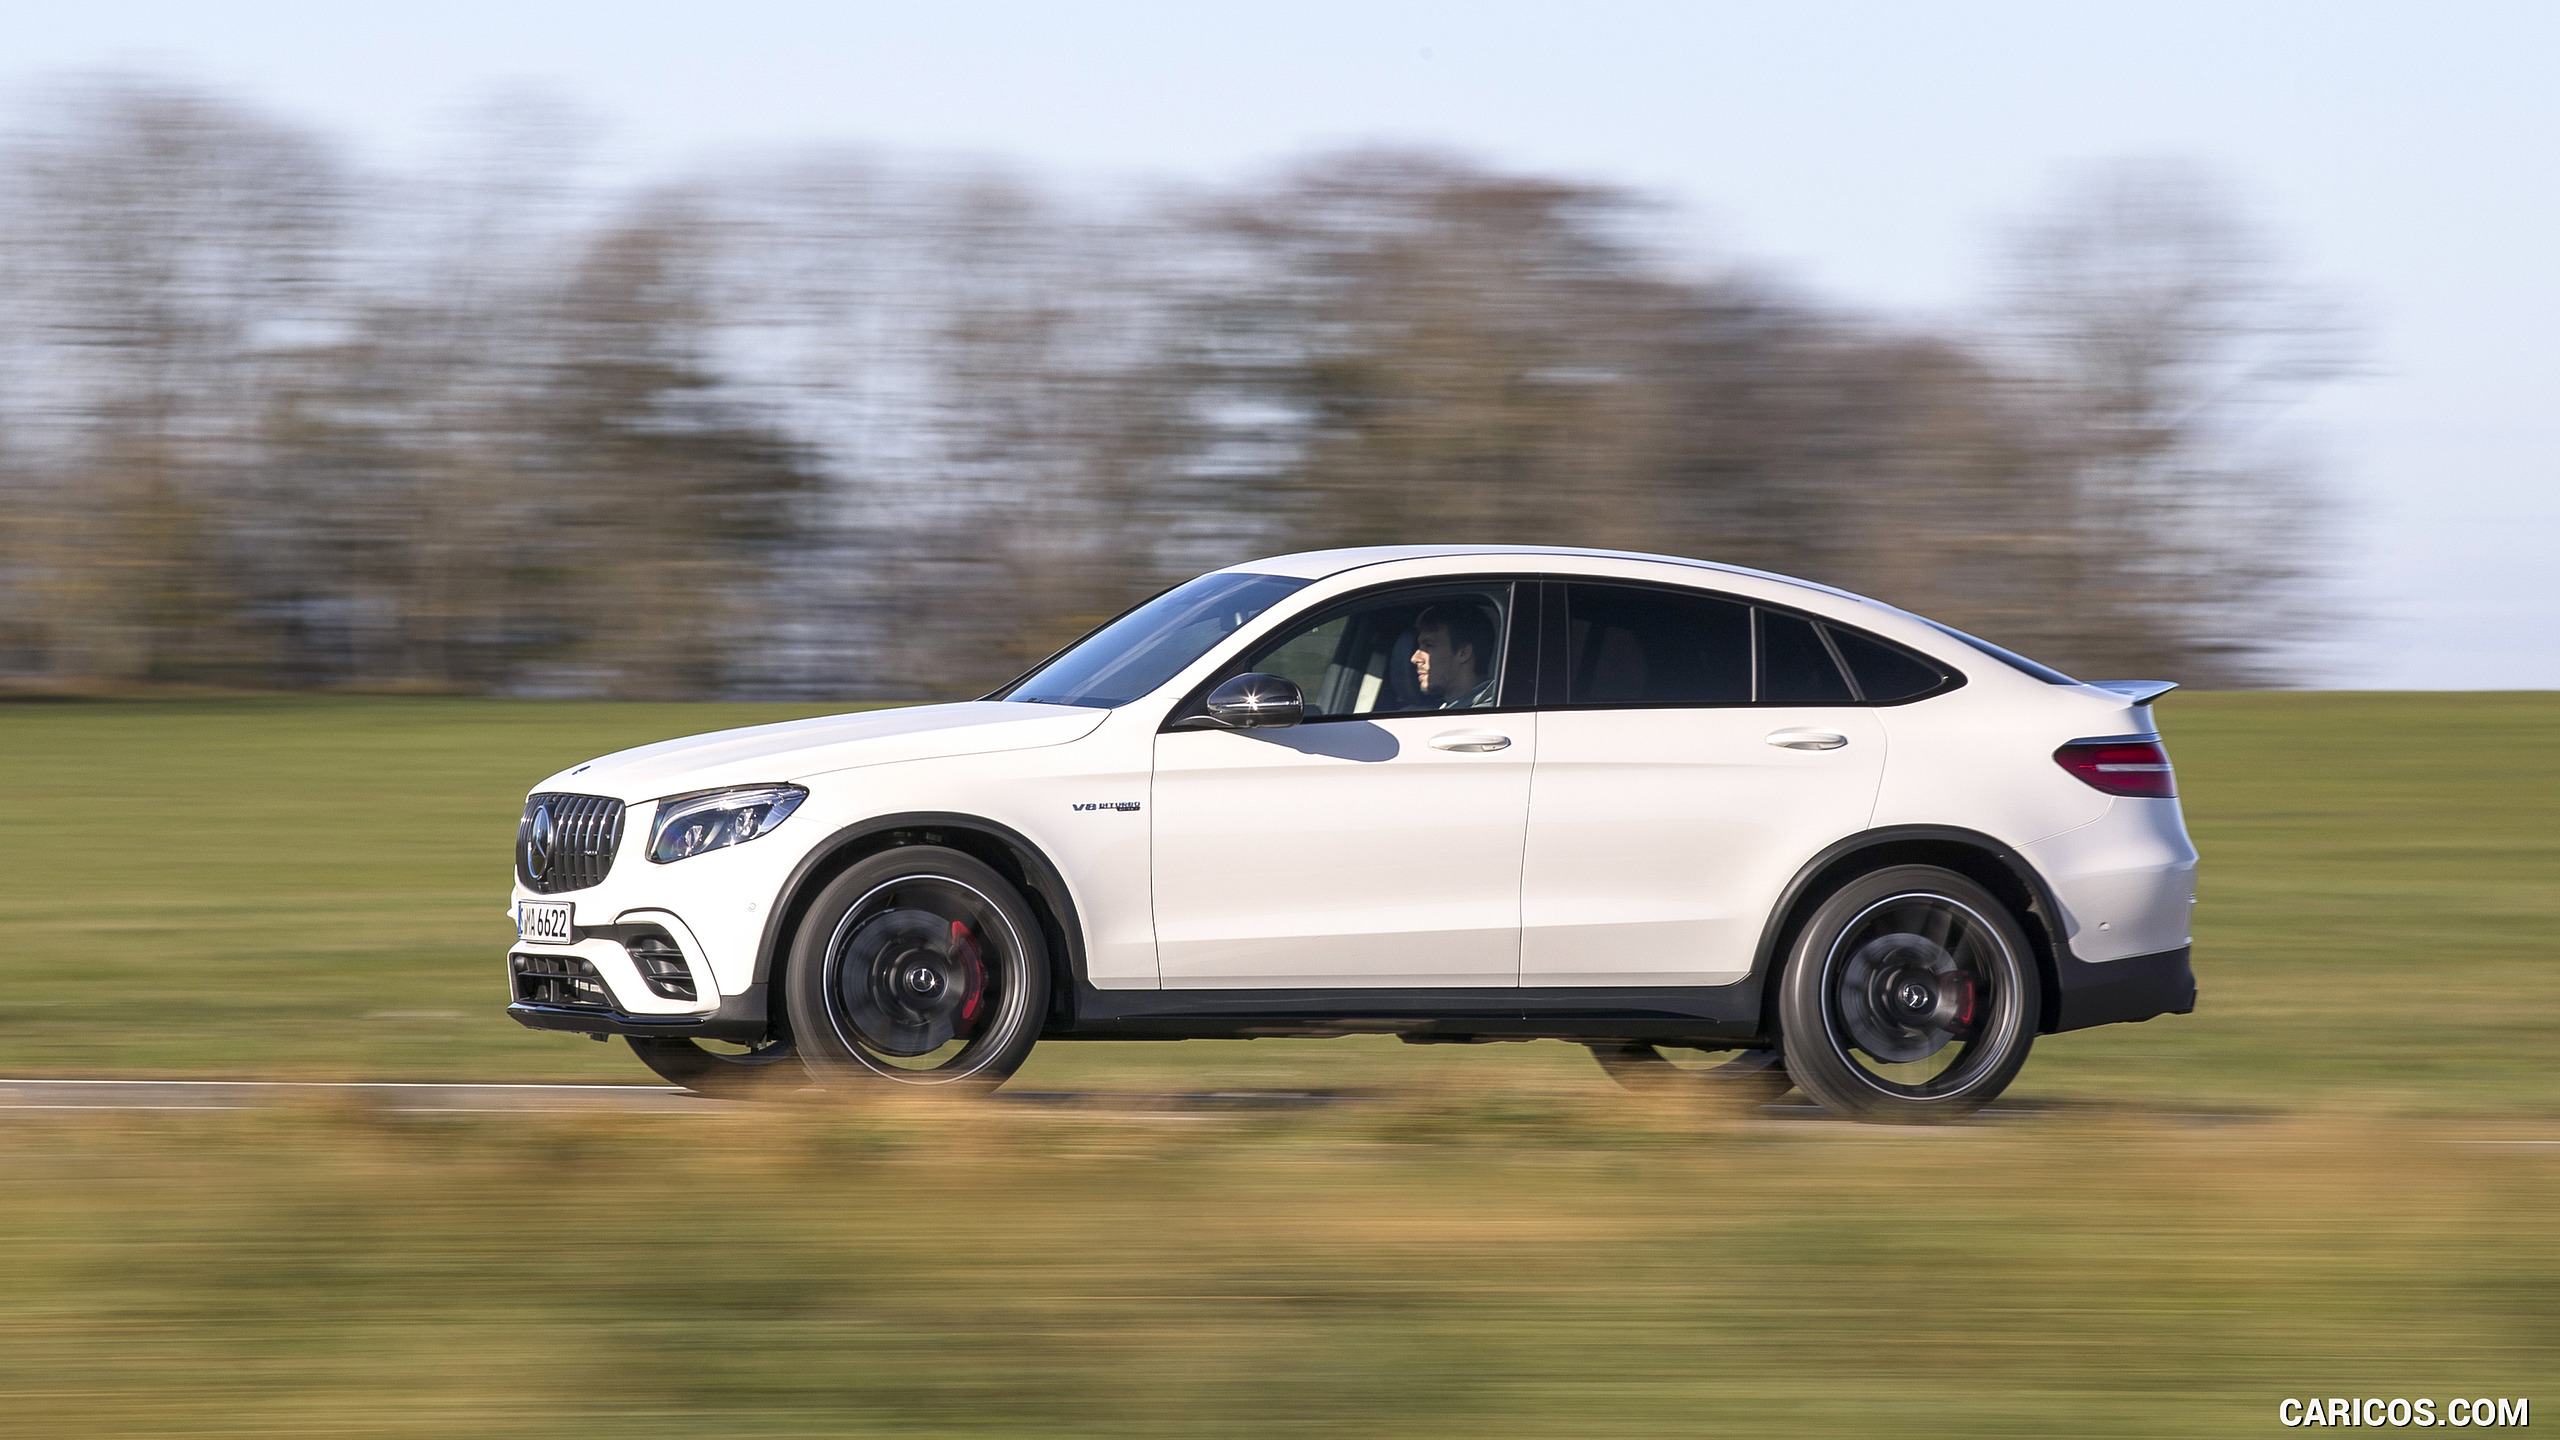 2018 Mercedes-AMG GLC 63 S Coupe - Side, #37 of 75